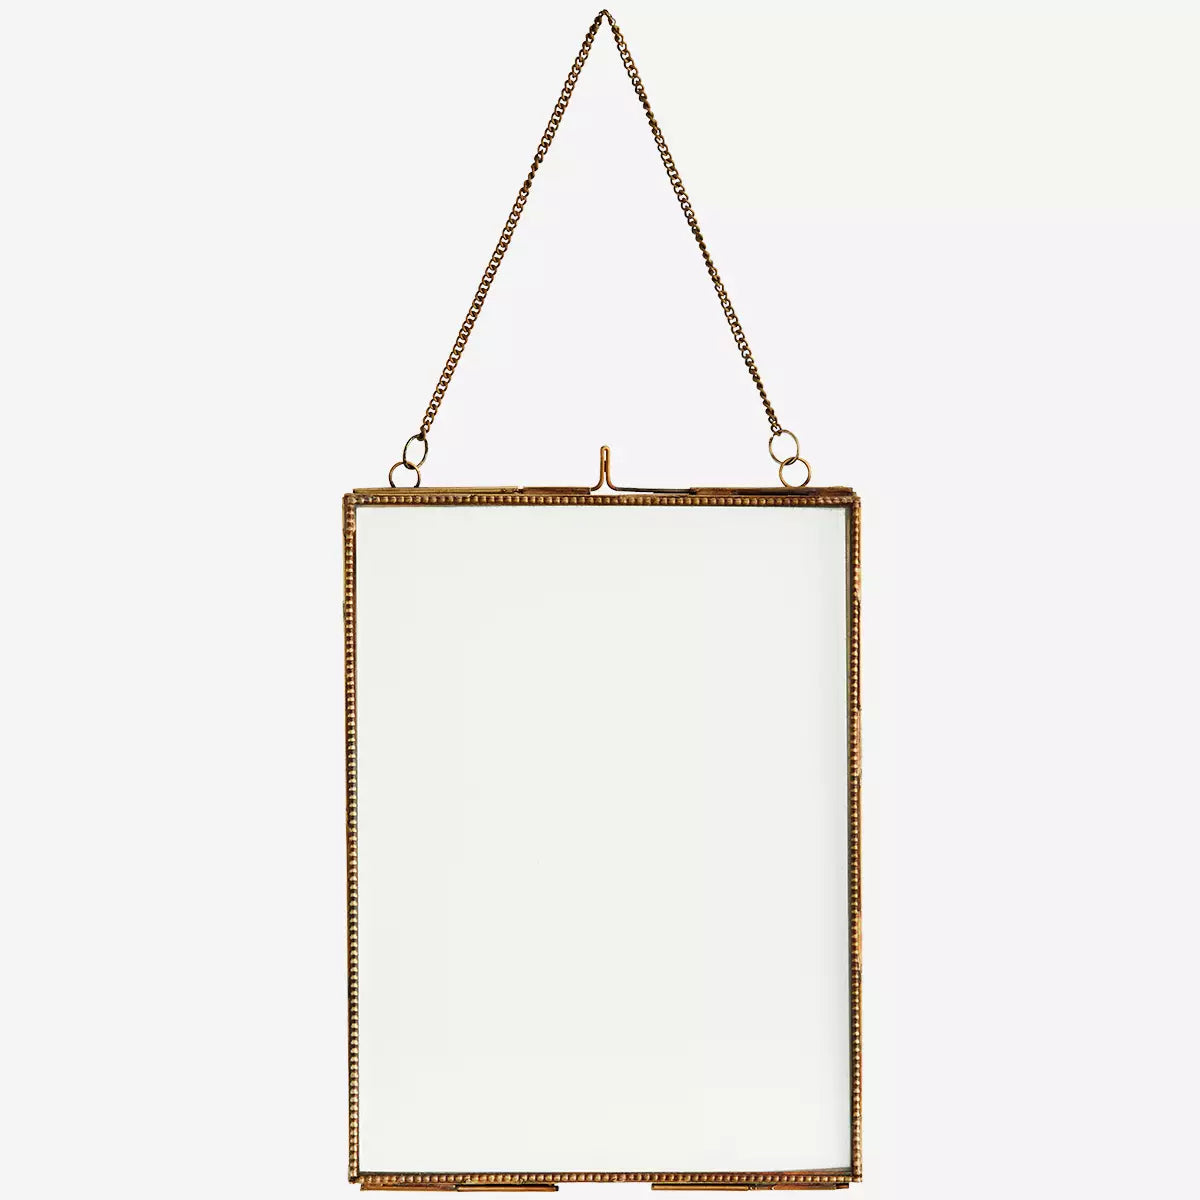 HANGING PHOTO FRAME W/ ENGRAVED BORDERS